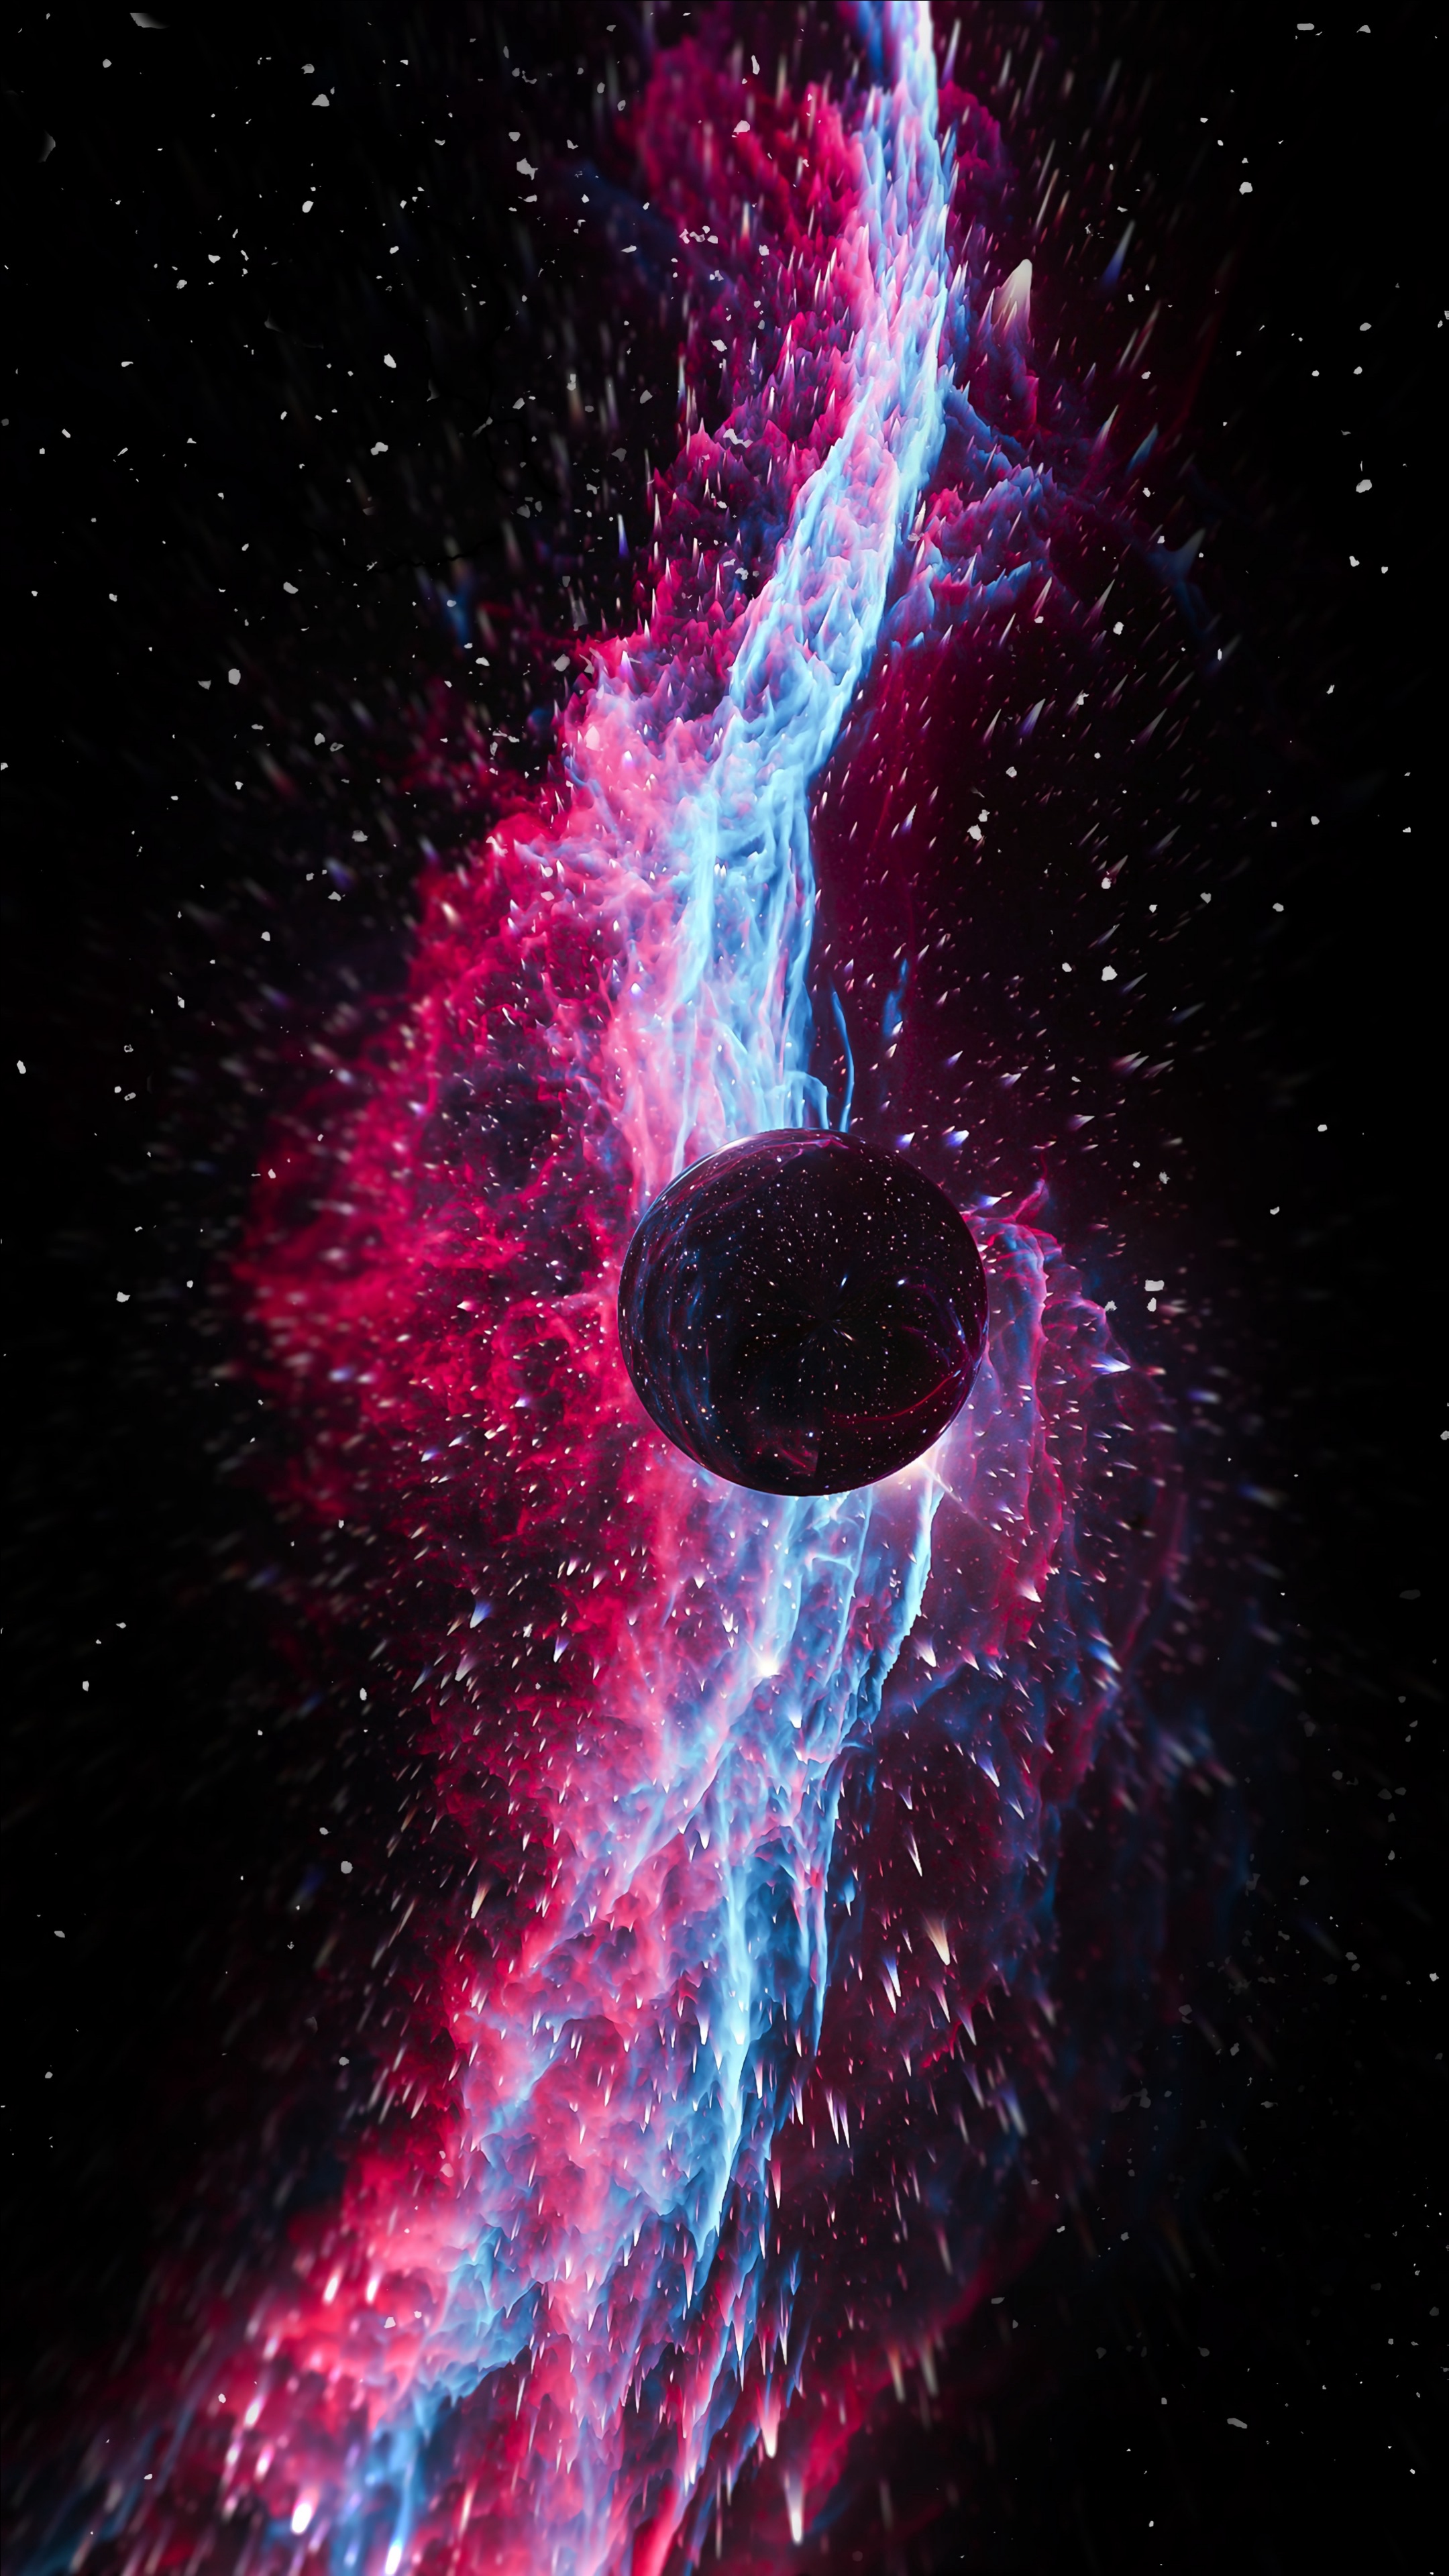 3d, ball, bright, flight, cosmic explosion, space explosion images